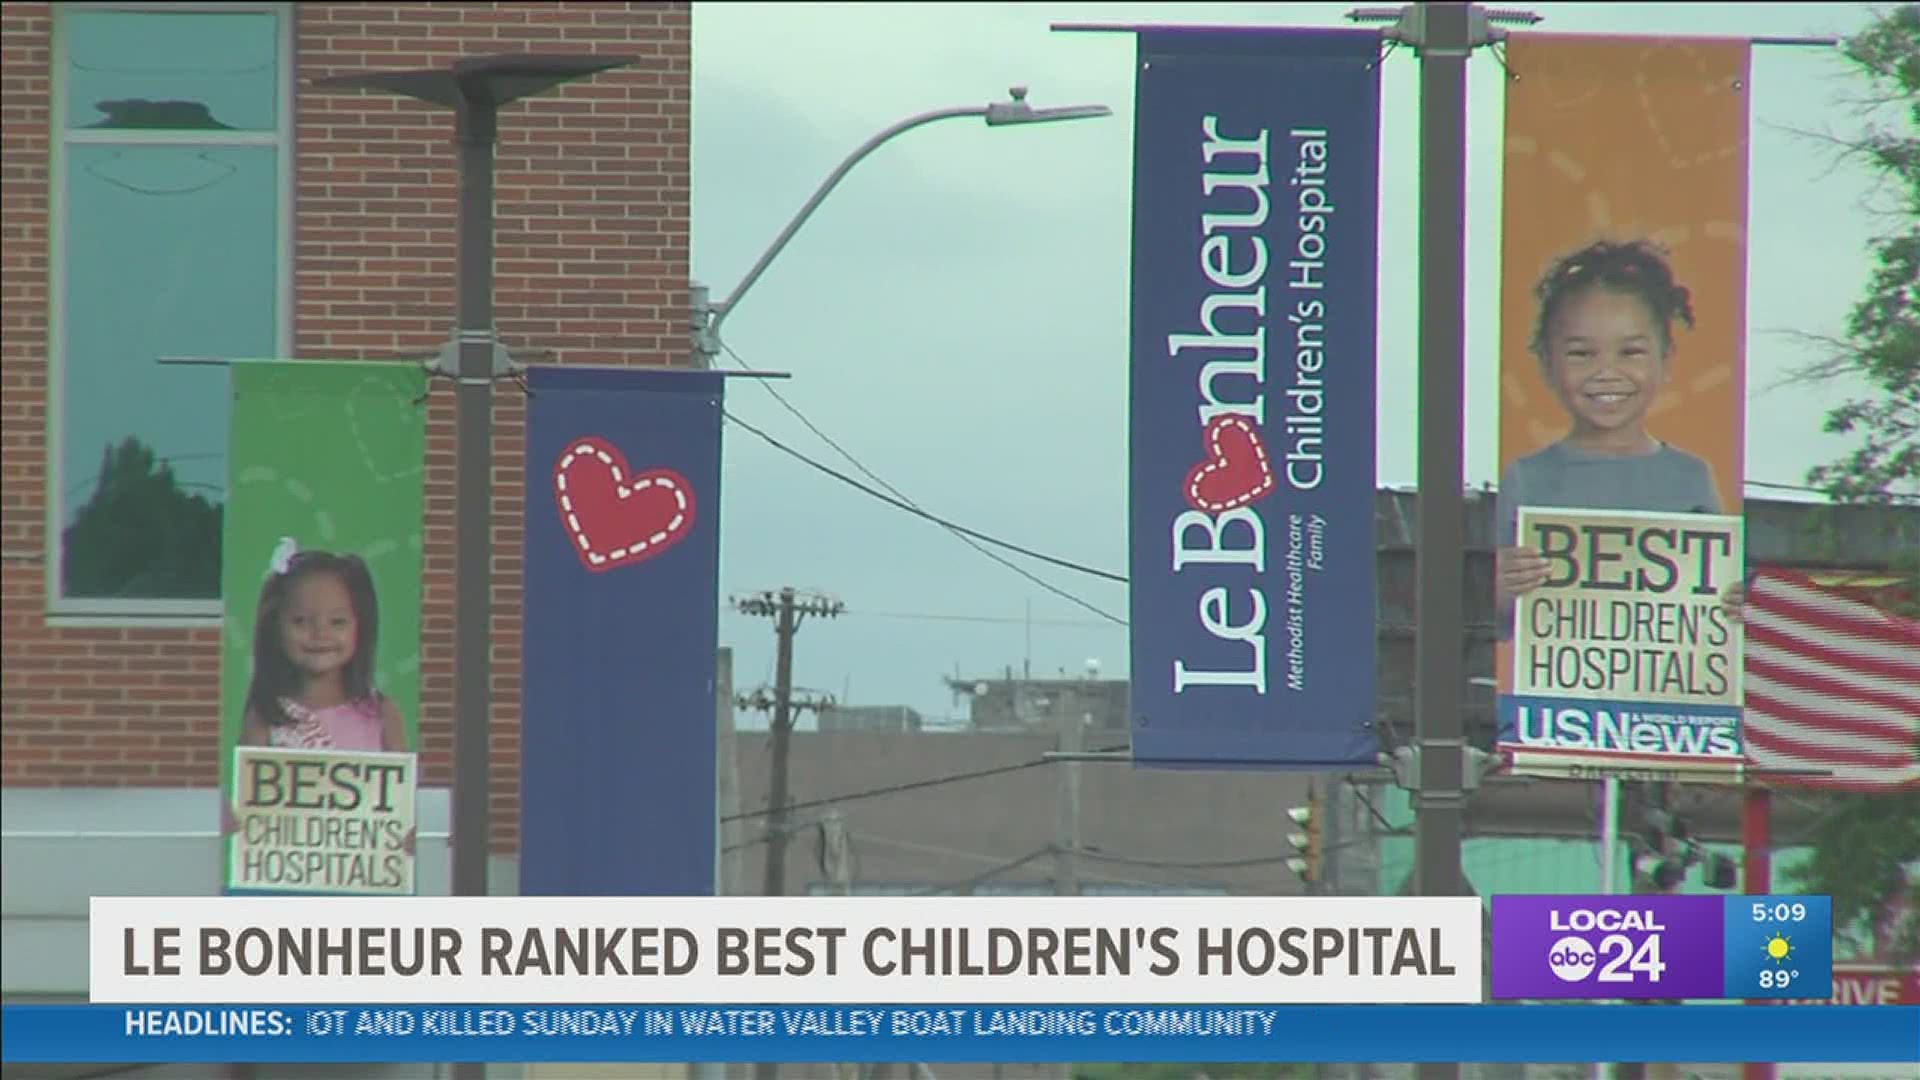 The annual Best Children’s Hospitals rankings and ratings is now in its 15th year.